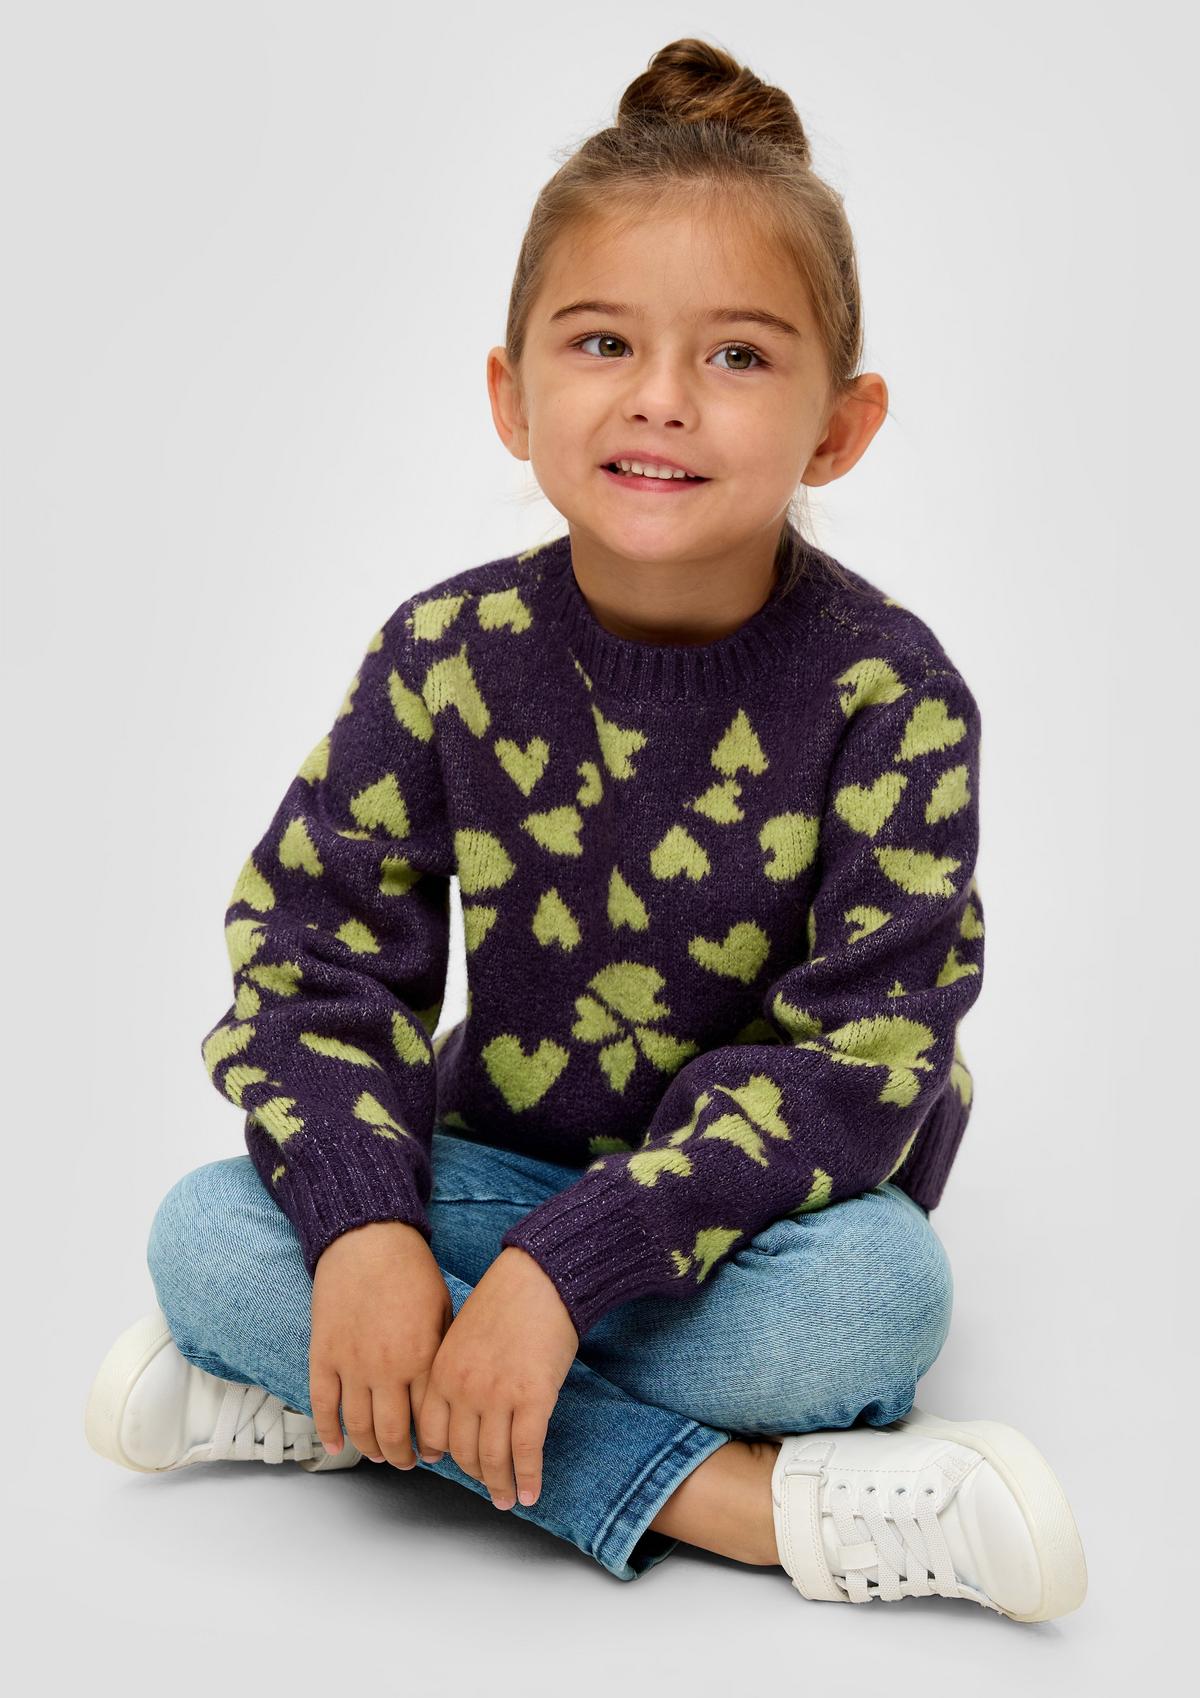 Knitted jumper with a heart pattern